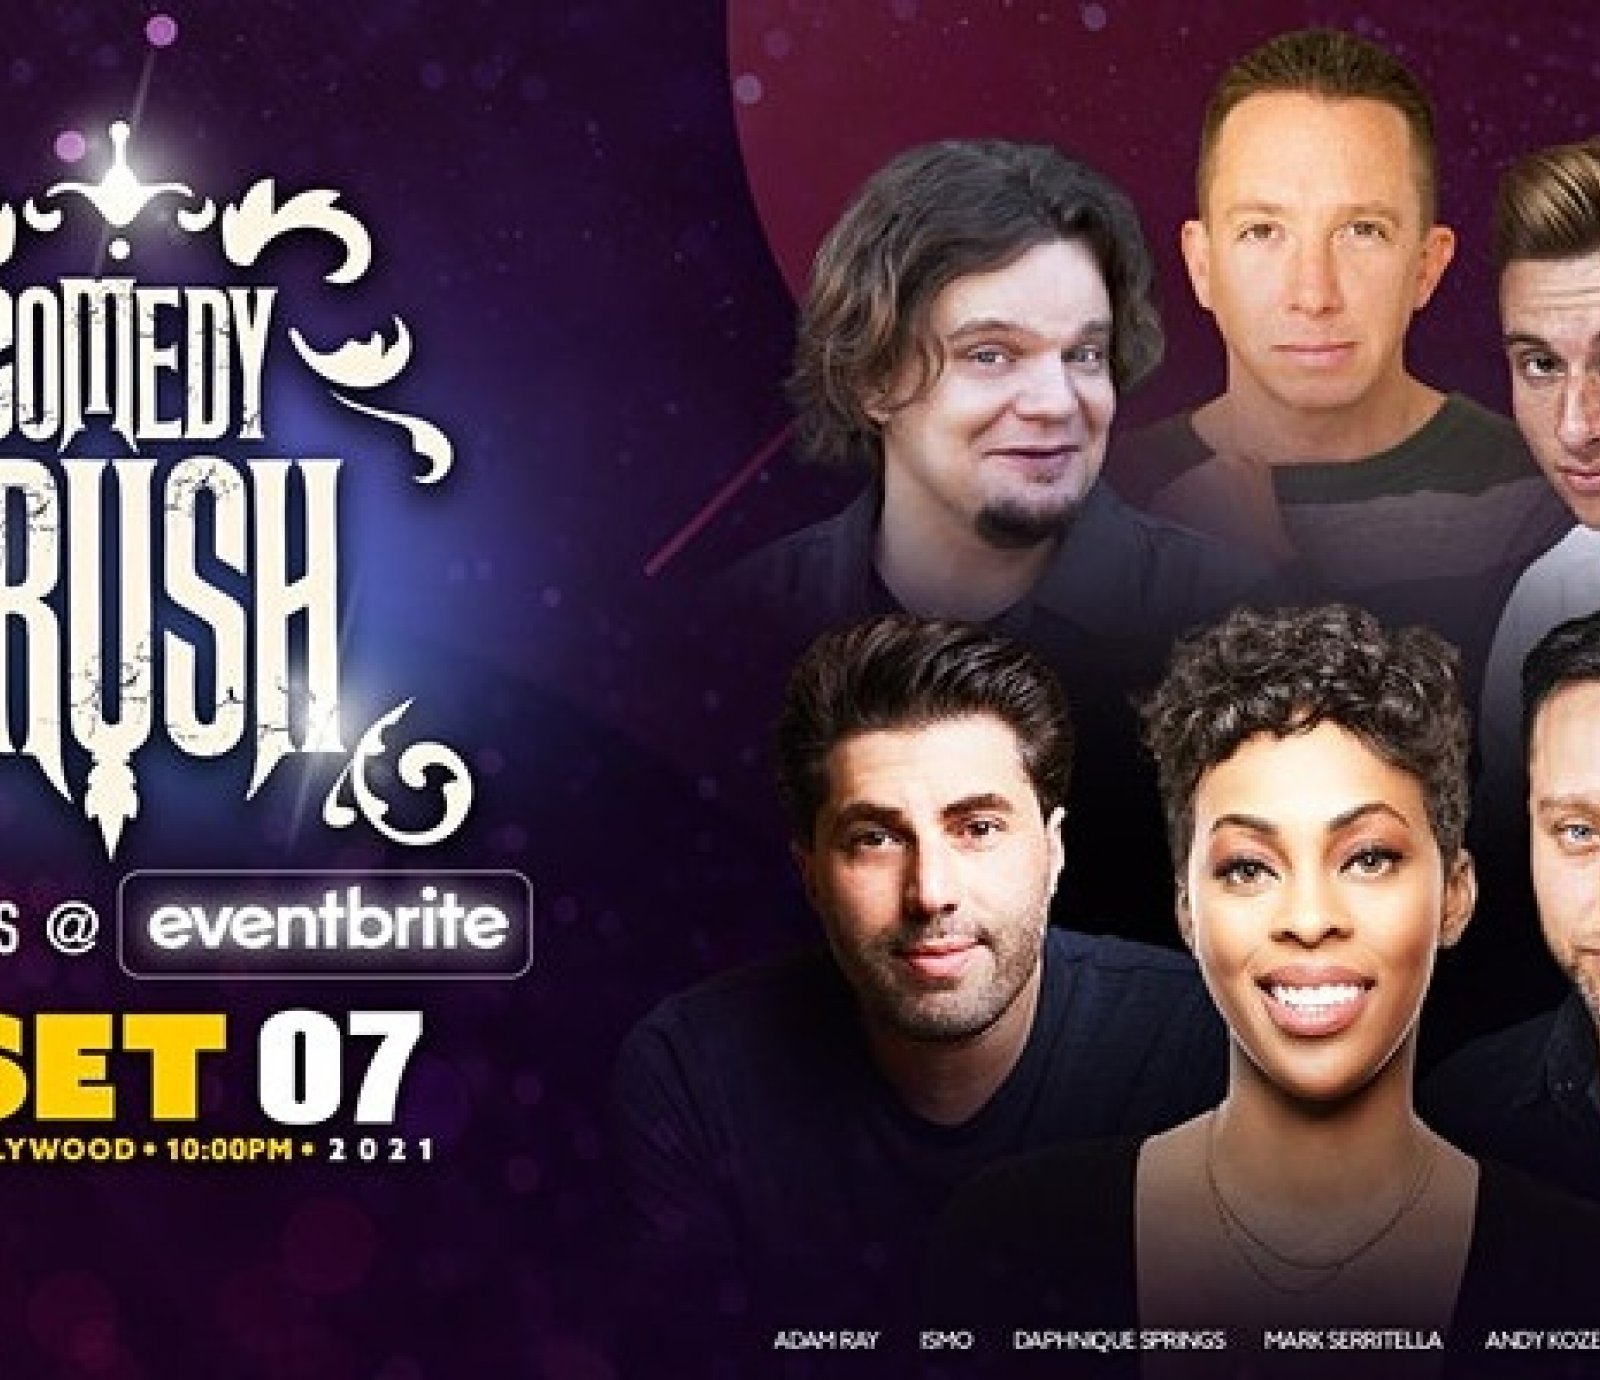 Laugh Factory Presents: Comedy Crush!!